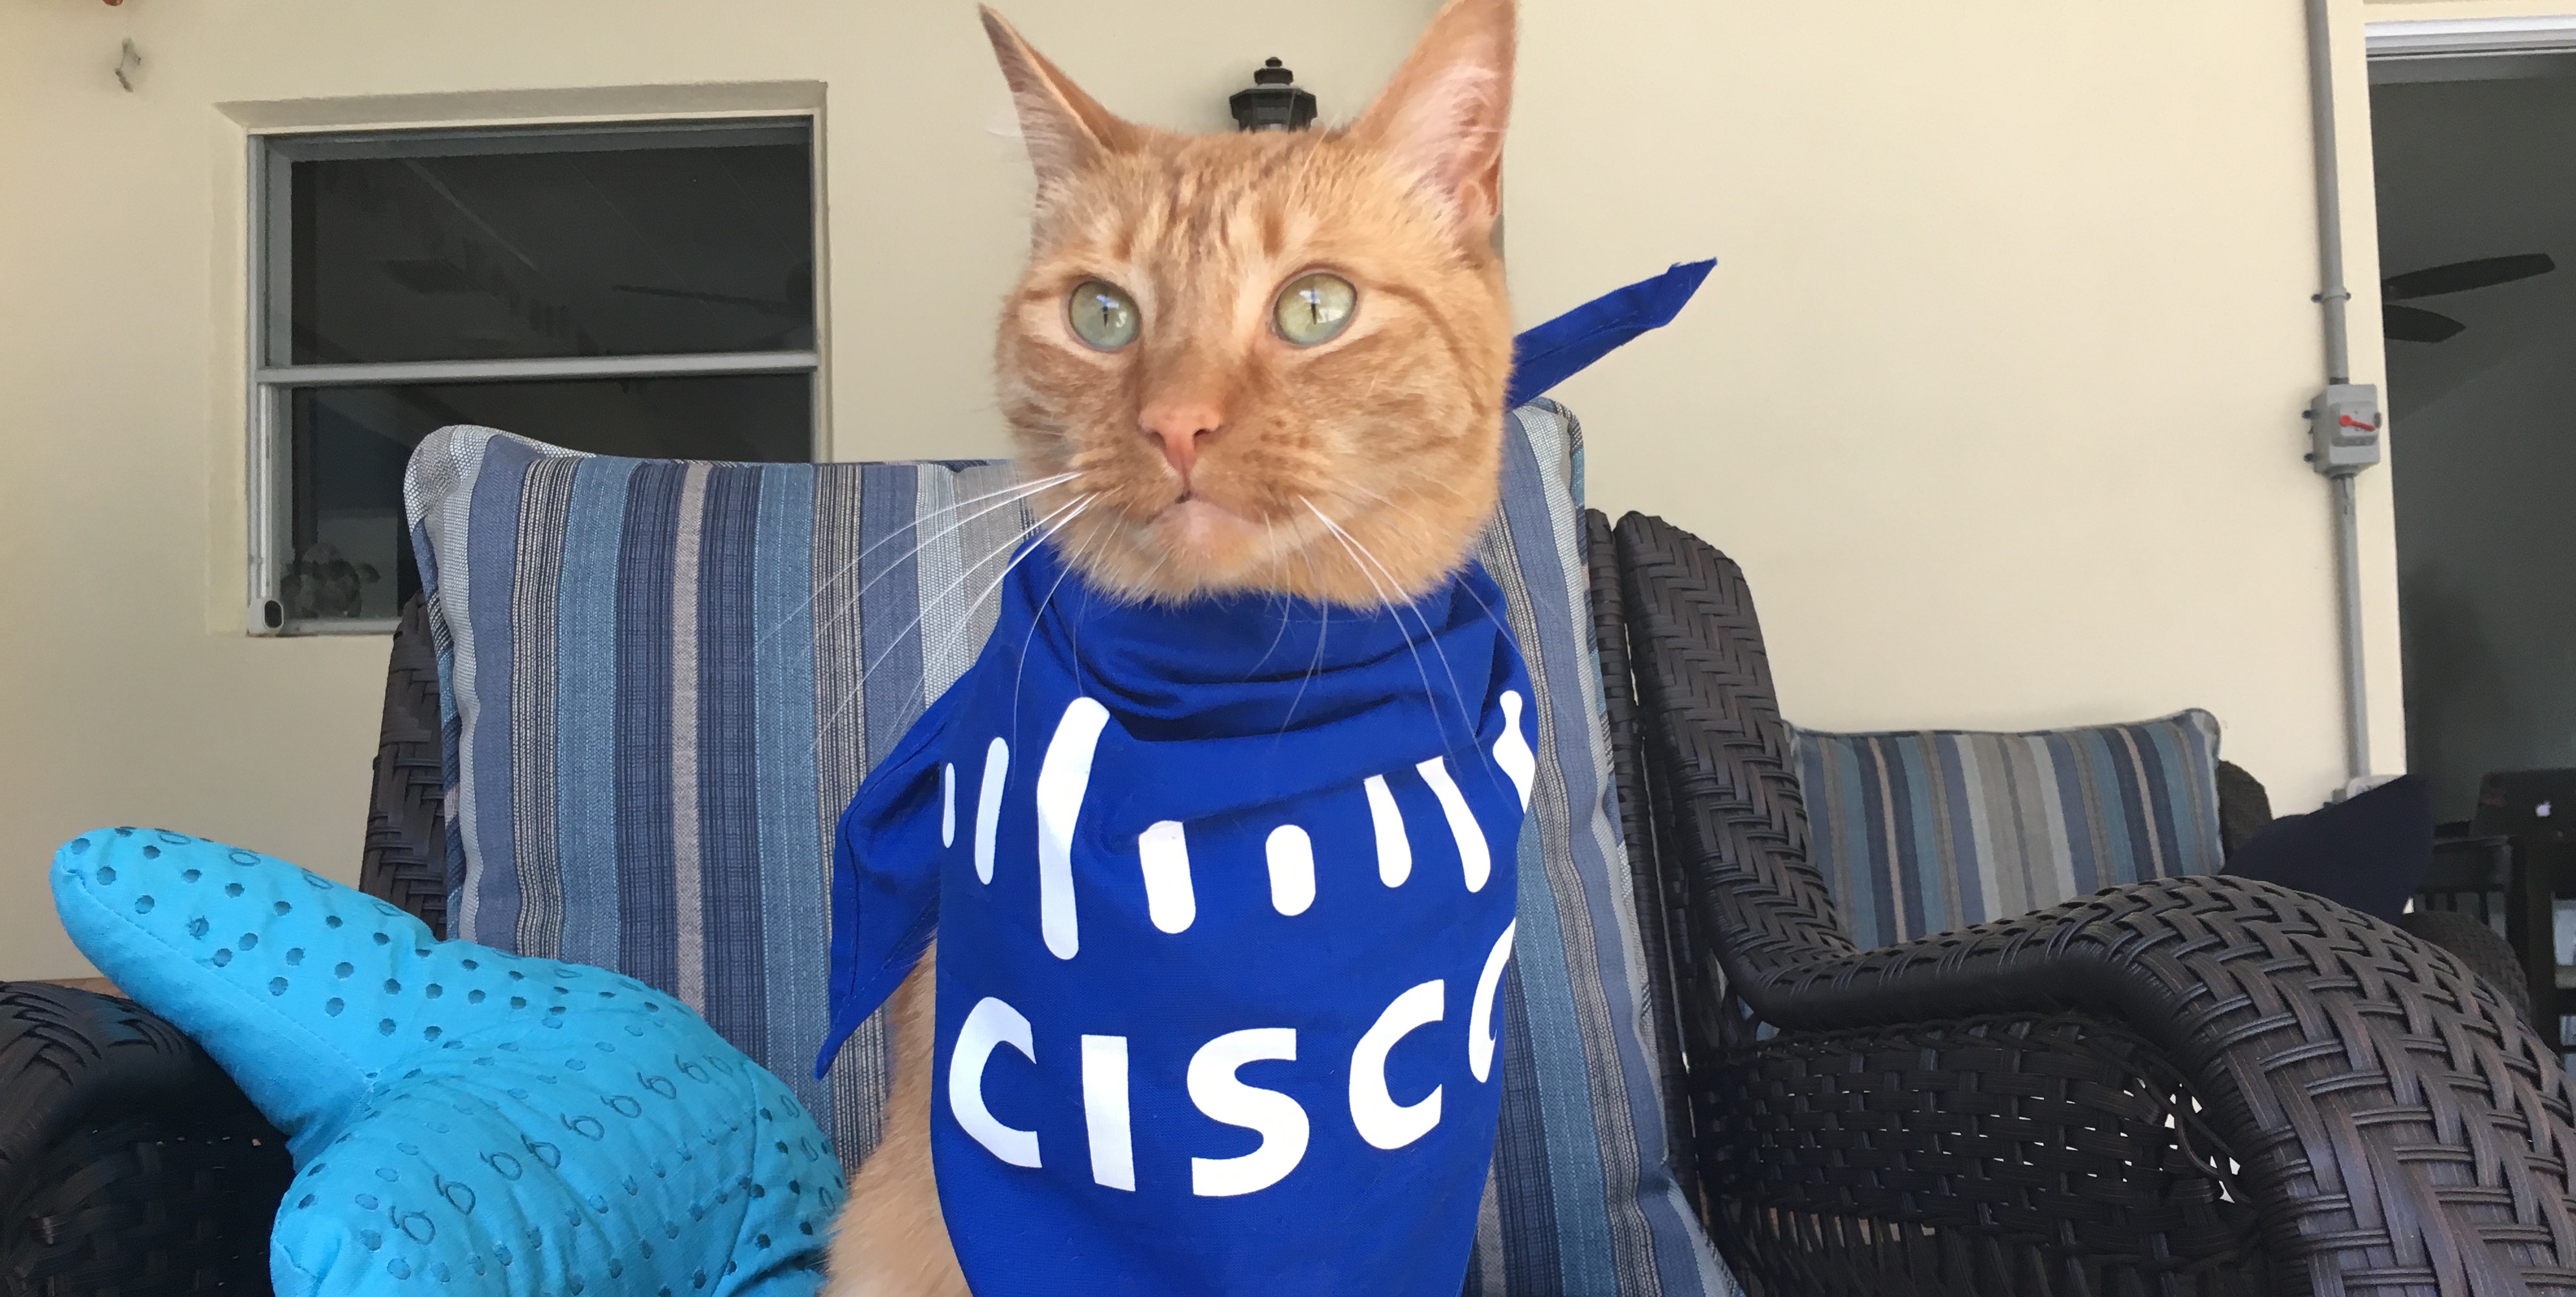 Being a Cisco Pet Is a “Ruff” Life, But It’s Also “Purrfect”